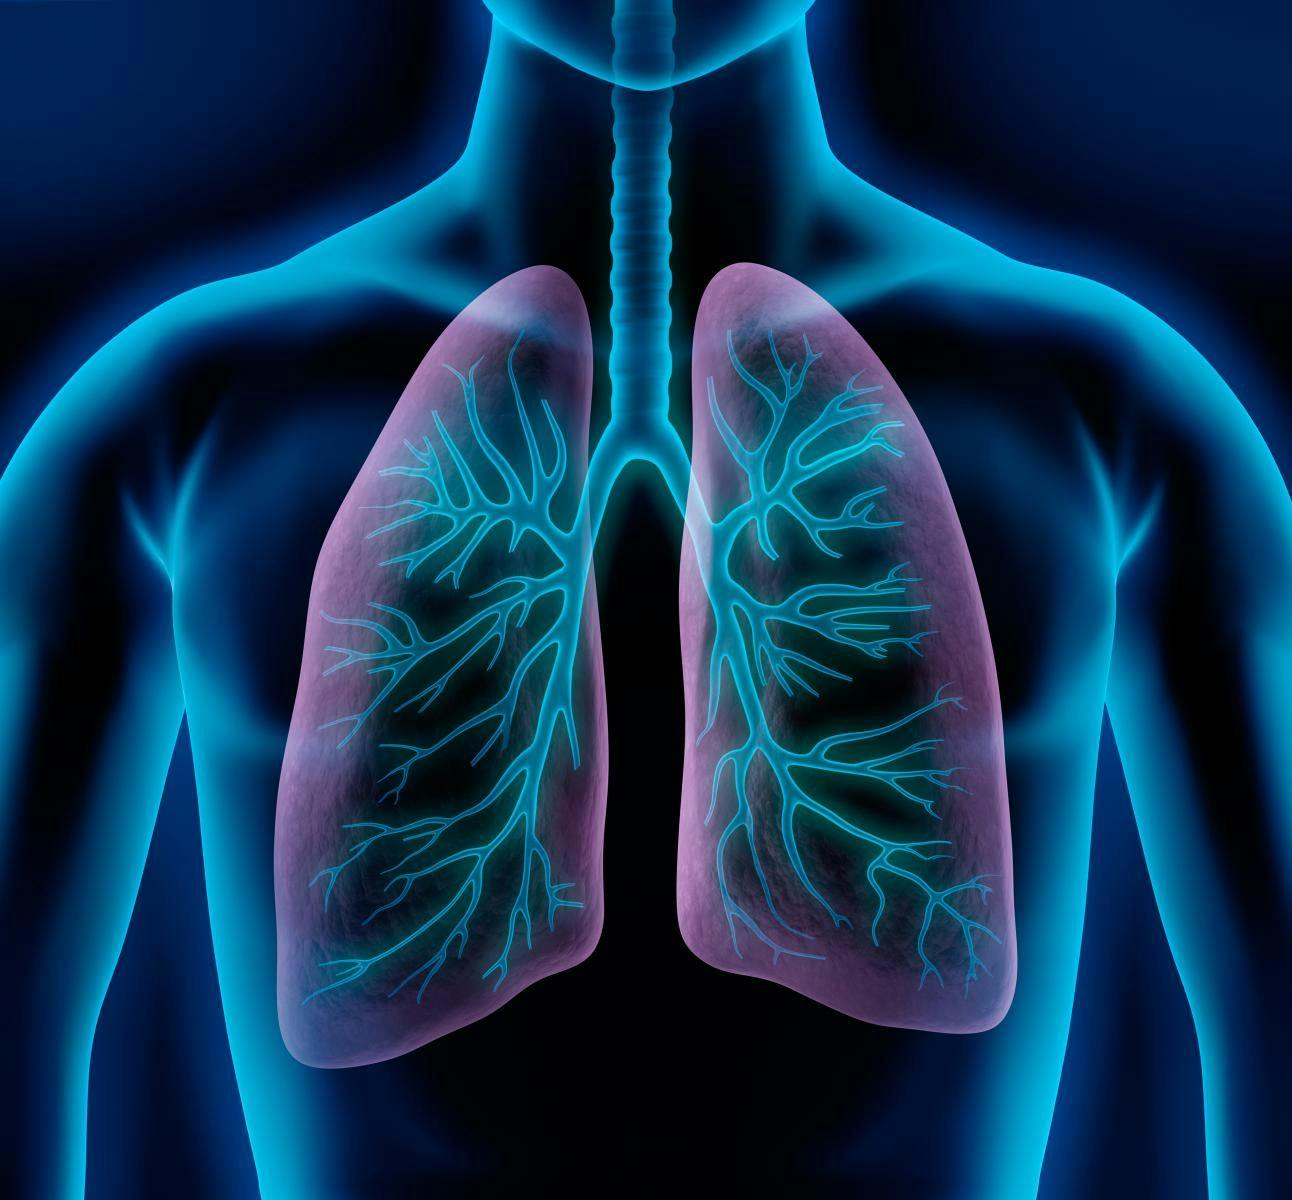 Three-Drug Combo Improves Lung Function in Patients with Cystic Fibrosis